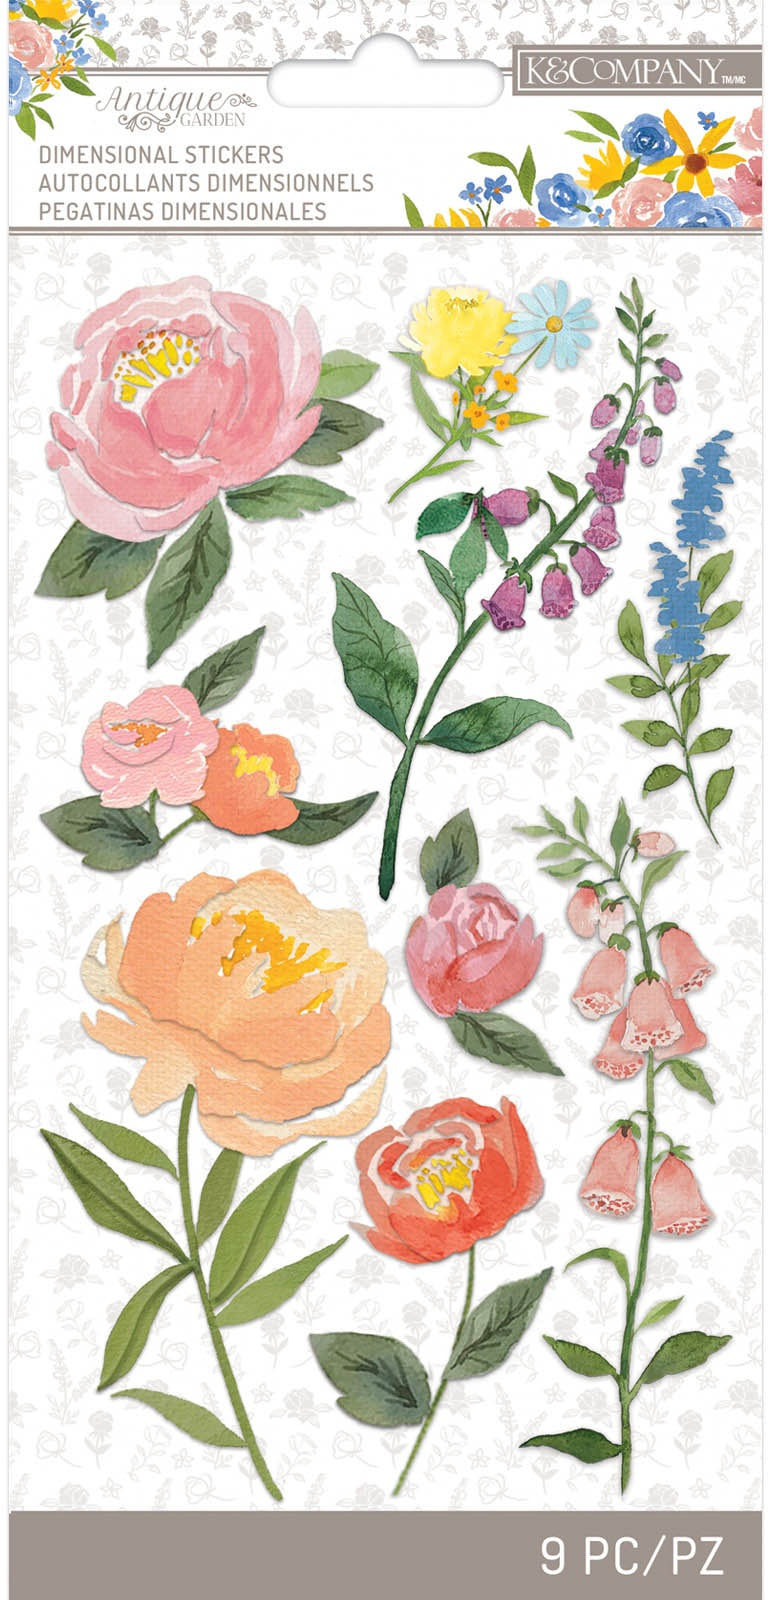 K&Company Antique Garden Vellum and Embossing Stickers 9/Pkg Floral Blooms